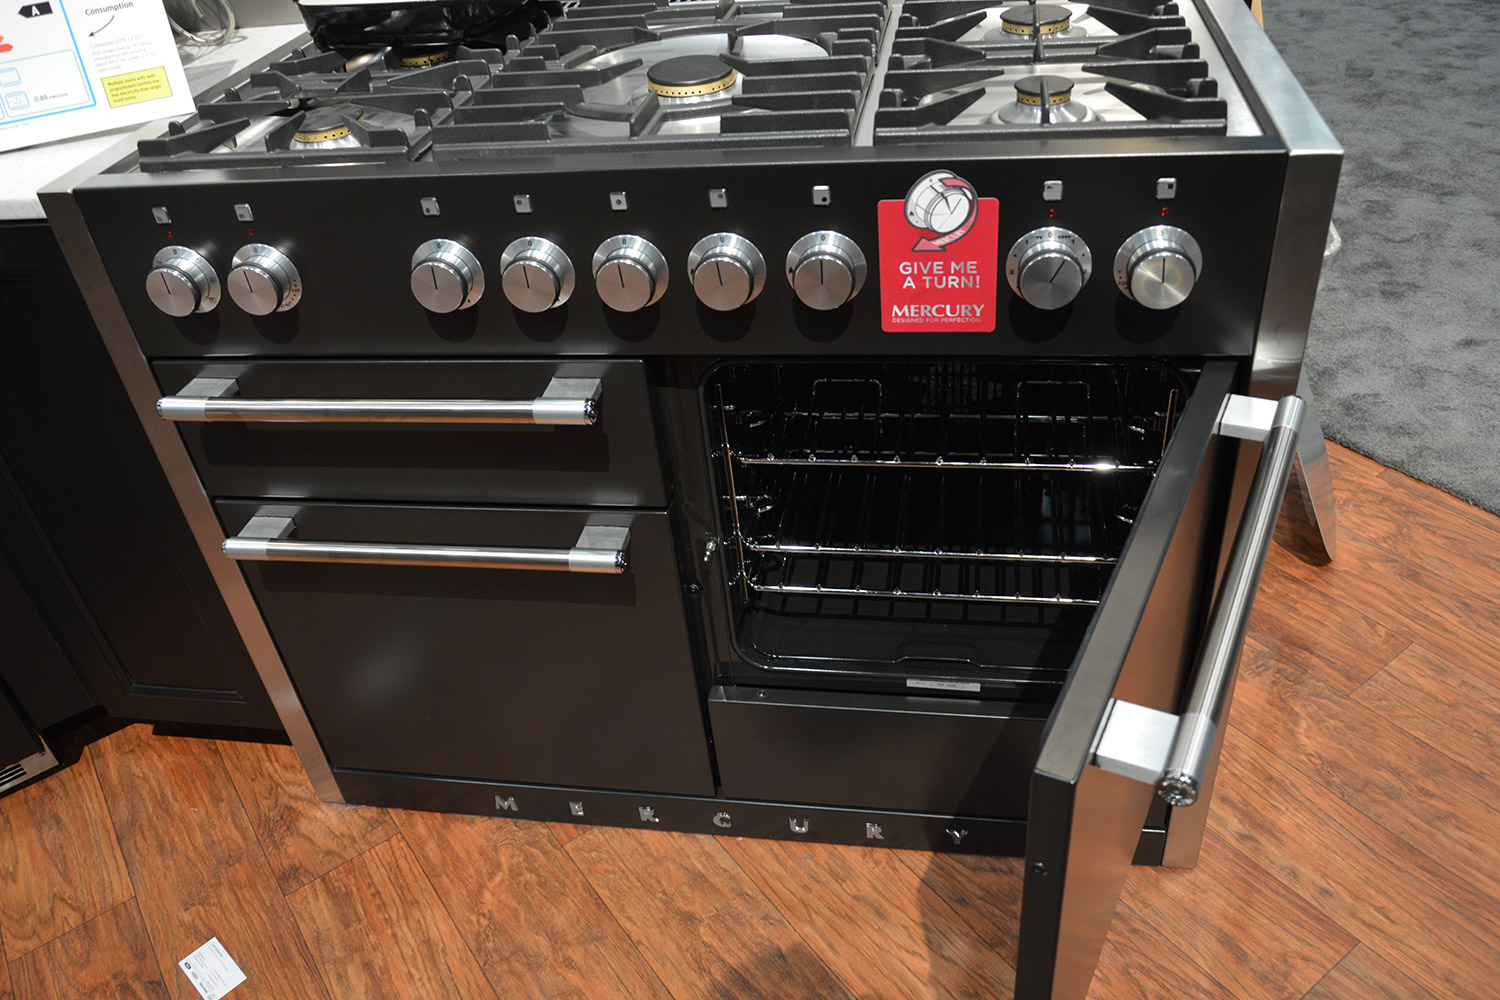 agas mercury oven will have a 48 inch induction cooktop aga marvel new luxury pro style ranges 4